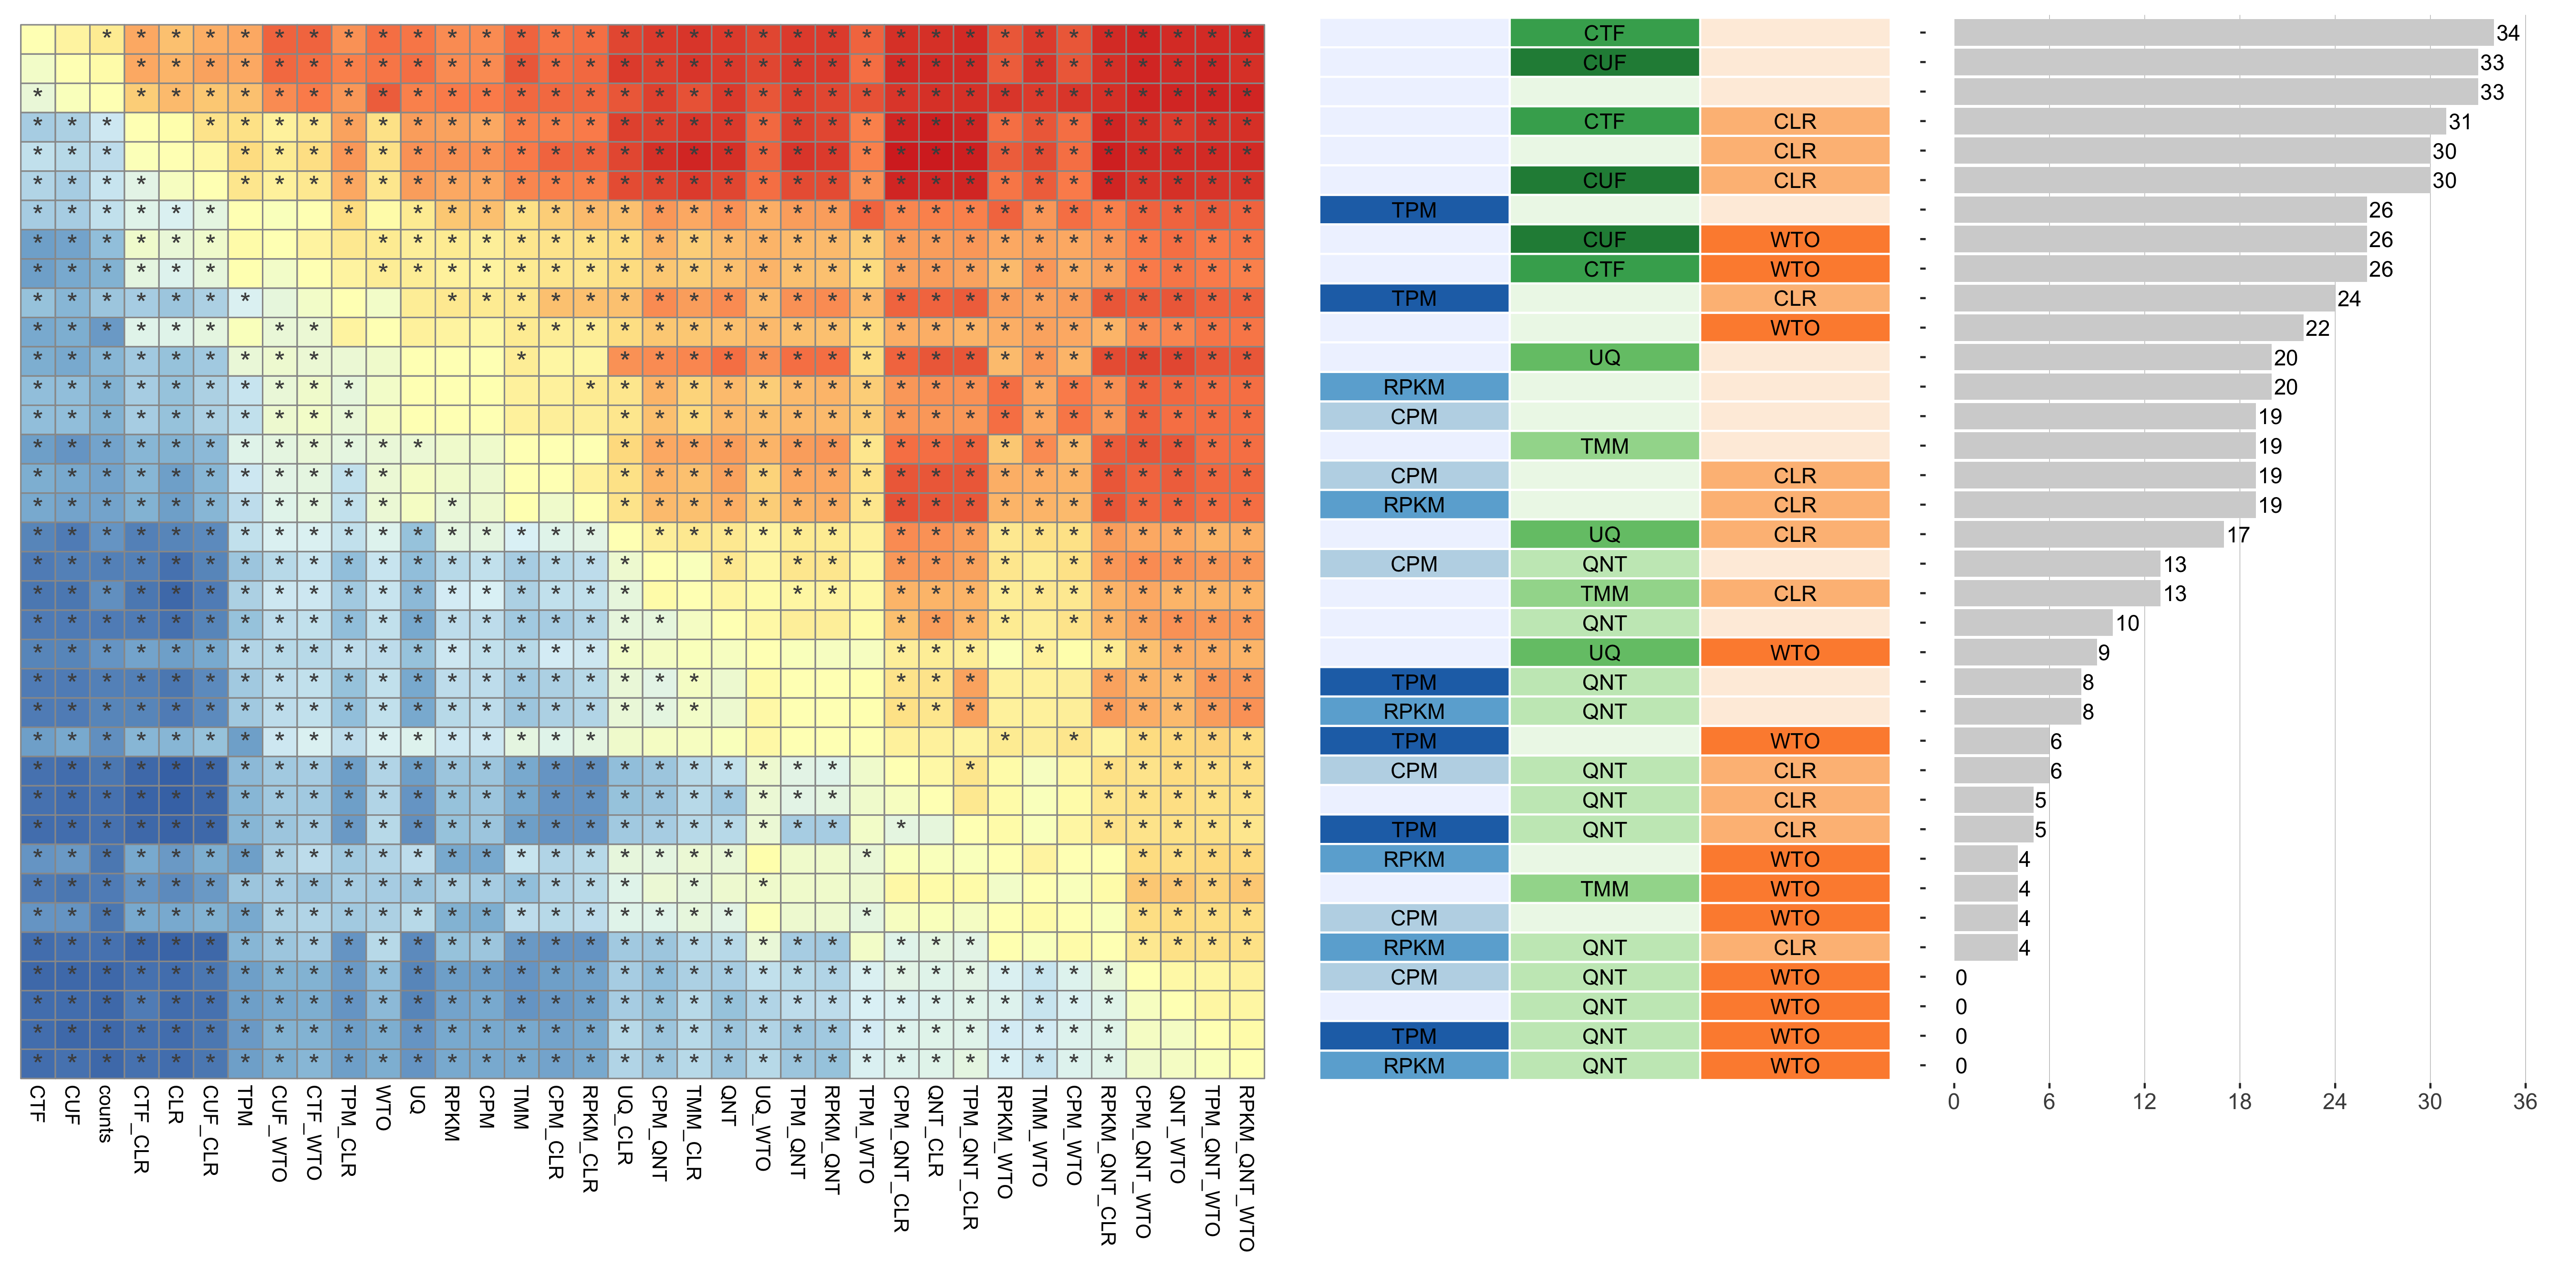 **Dataset-level pairwise comparison of workflow performance.** (**left**) The heatmap shows the relative performance of a pair of workflows, corresponding to a row and a column, directly compared to each other for the SRA datasets based on the tissue-naive gold standard. The color in each cell (row, column) represents the proportion of datasets for which the workflow along the row has a higher log2(p20r/prior) than the workflow along the column. Comparisons that are statistically significant (corrected p < 0.01) based on a paired Wilcoxon test are marked with an asterisk. (**middle**) The workflows (rows) are described in terms of the specific method used in the within-sample normalization (blues), between-sample normalization (greens), and network transformation (oranges) stages. (**right**) The barplot shows the number of times each workflow was significantly greater than another workflow.